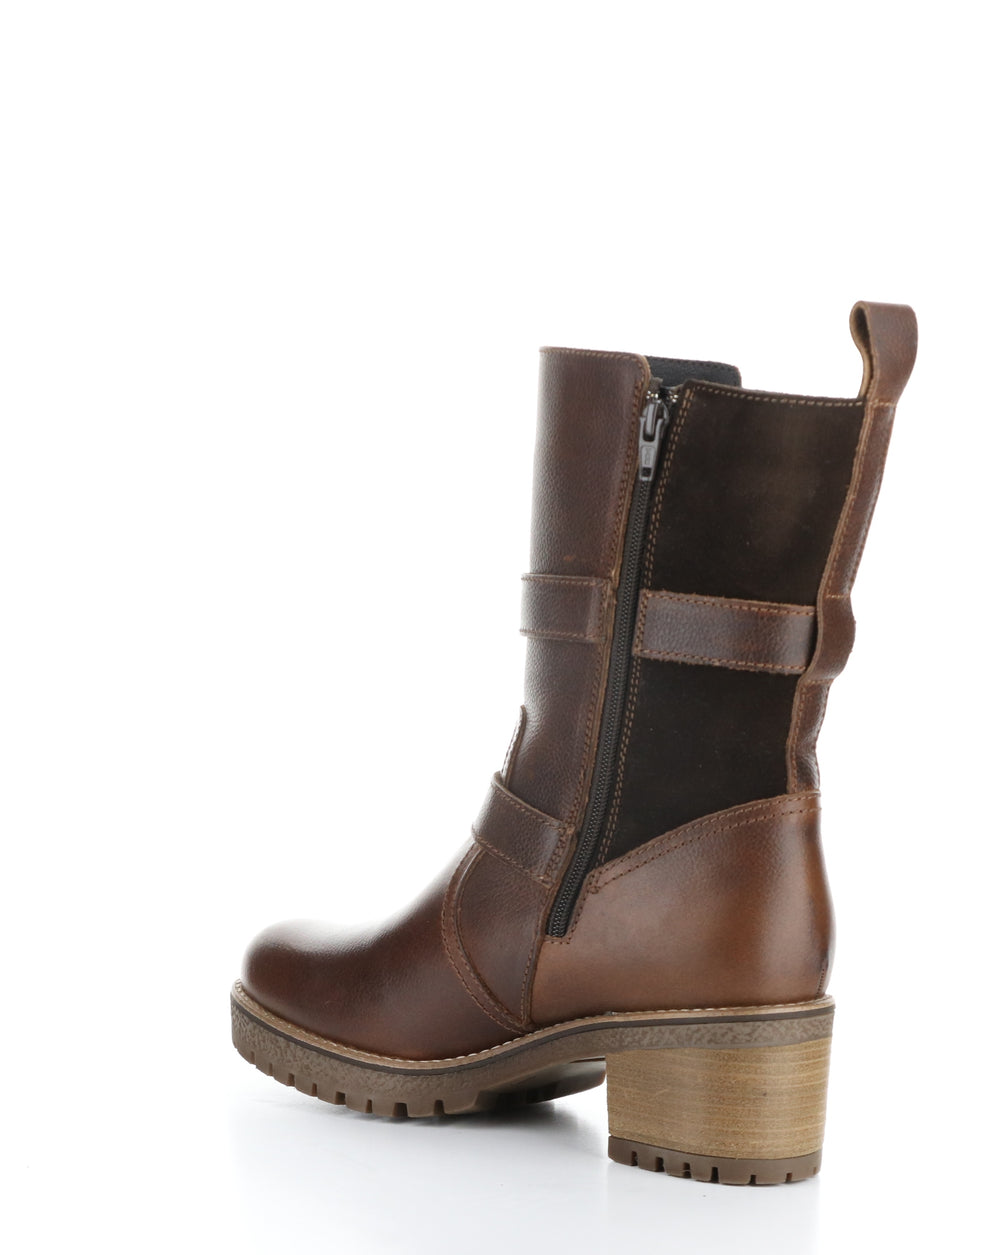 MAISE BRANDY/COFFEE Round Toe Boots